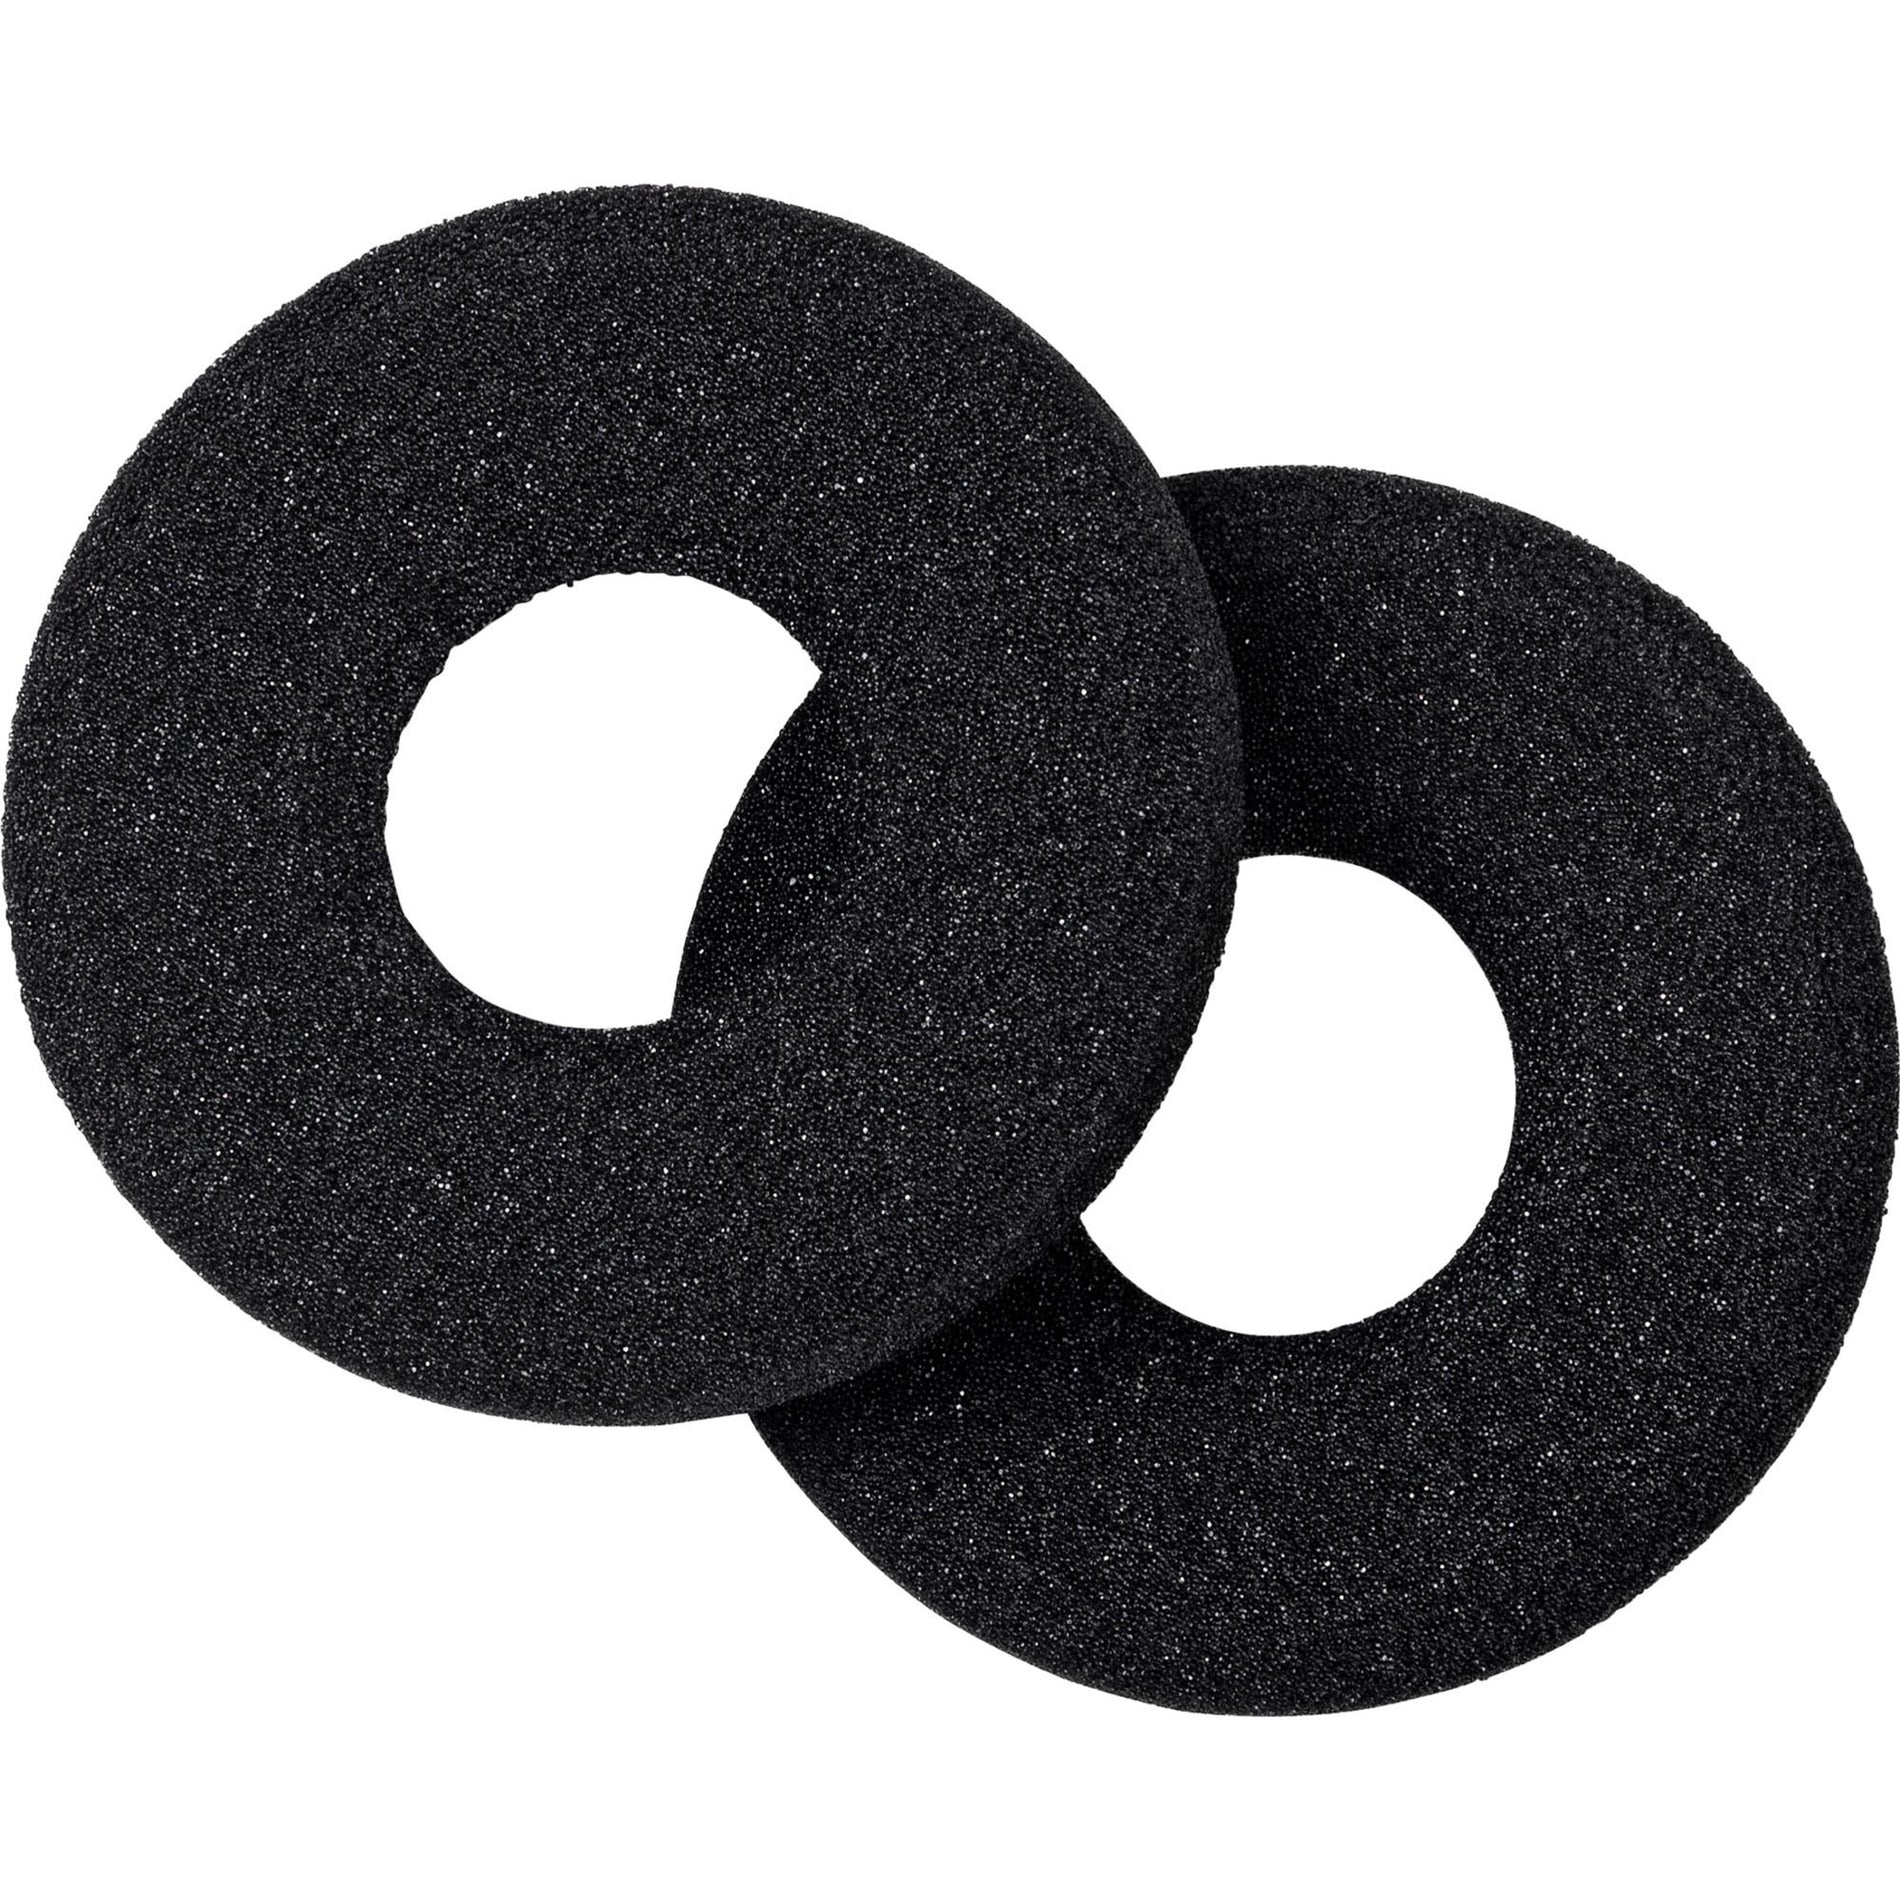 EPOS 1000799 Foam Earpad - 2 Piece, Compatible with EPOS Headsets